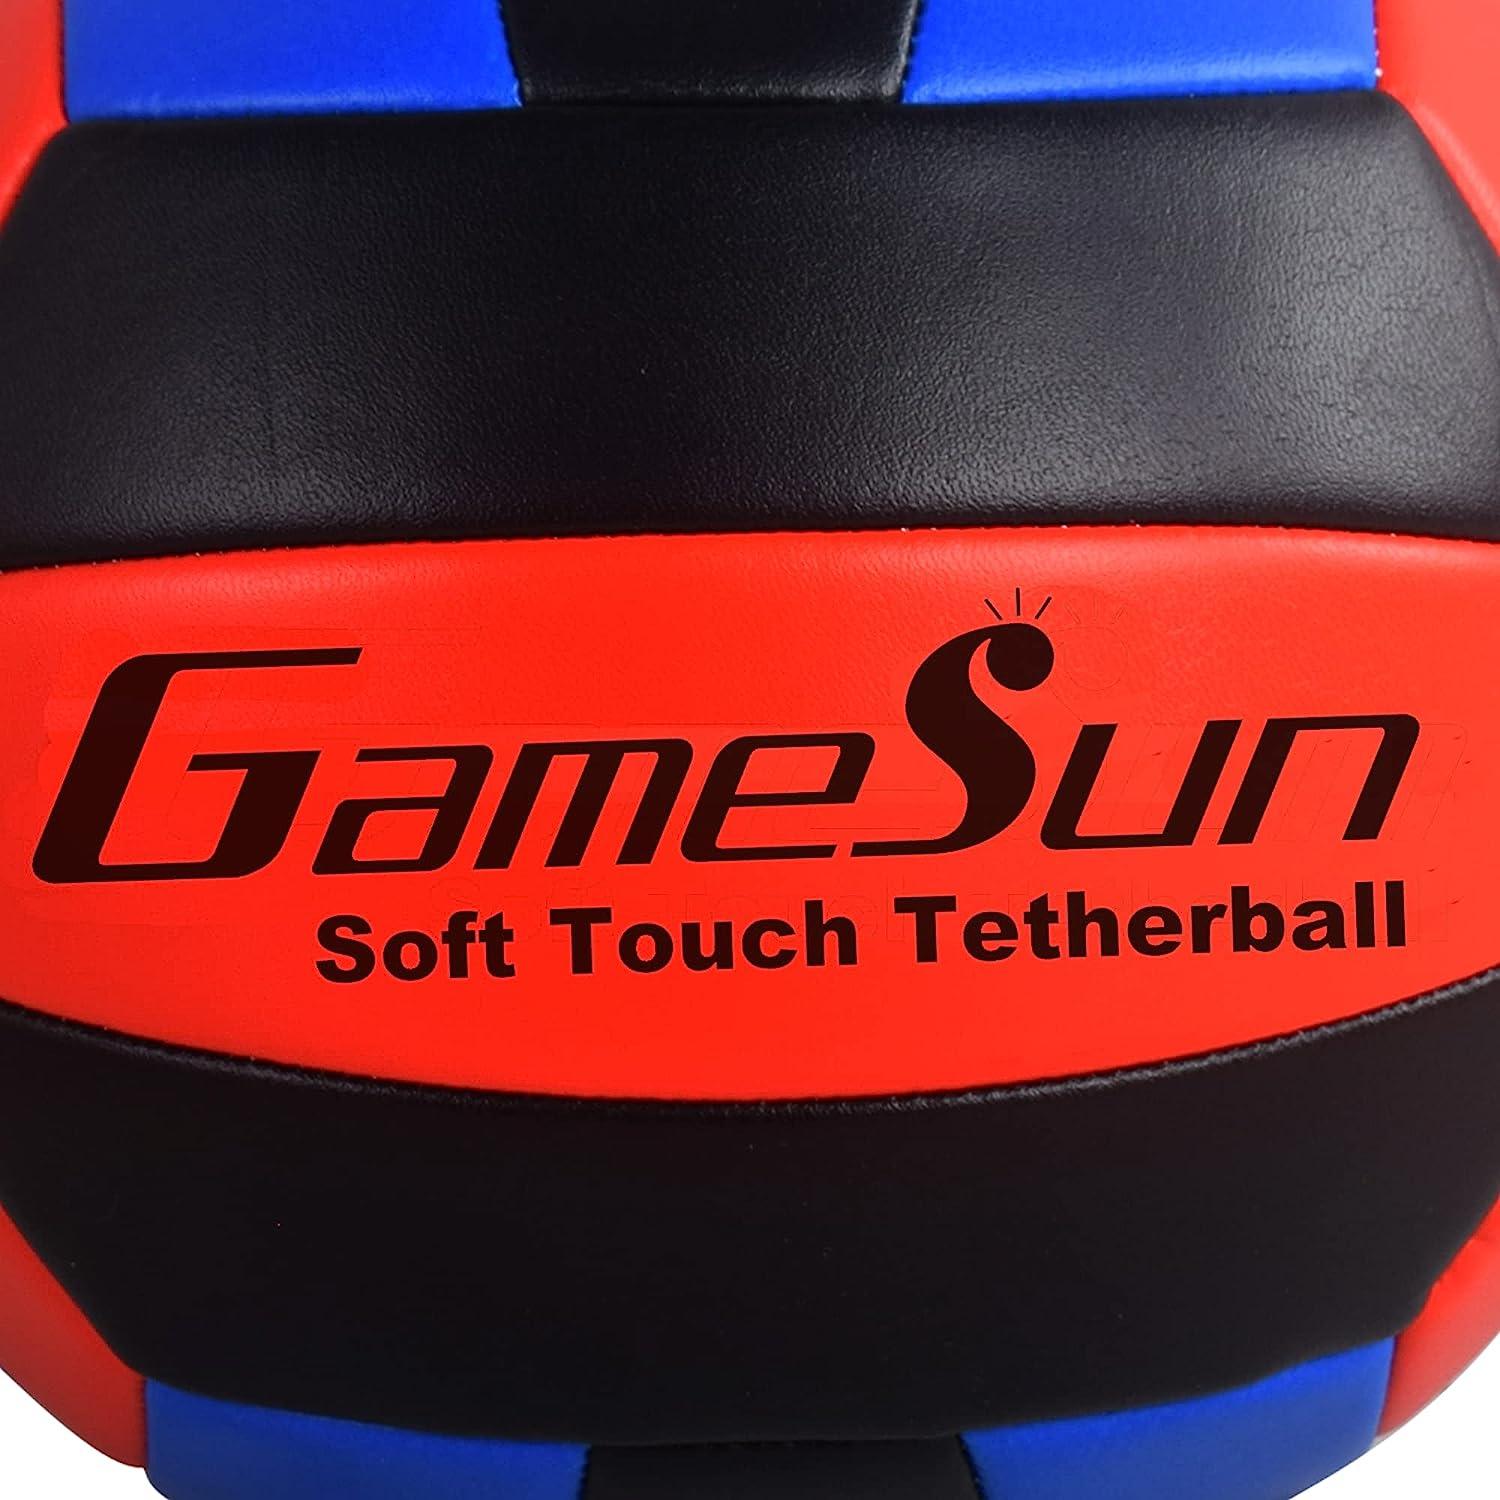 GAMESUN Tetherball and Rope,Full-Size Soft Rubber, Portable Tetherballs with Soft Rope - Great Outdoor Game for Family Fun Play